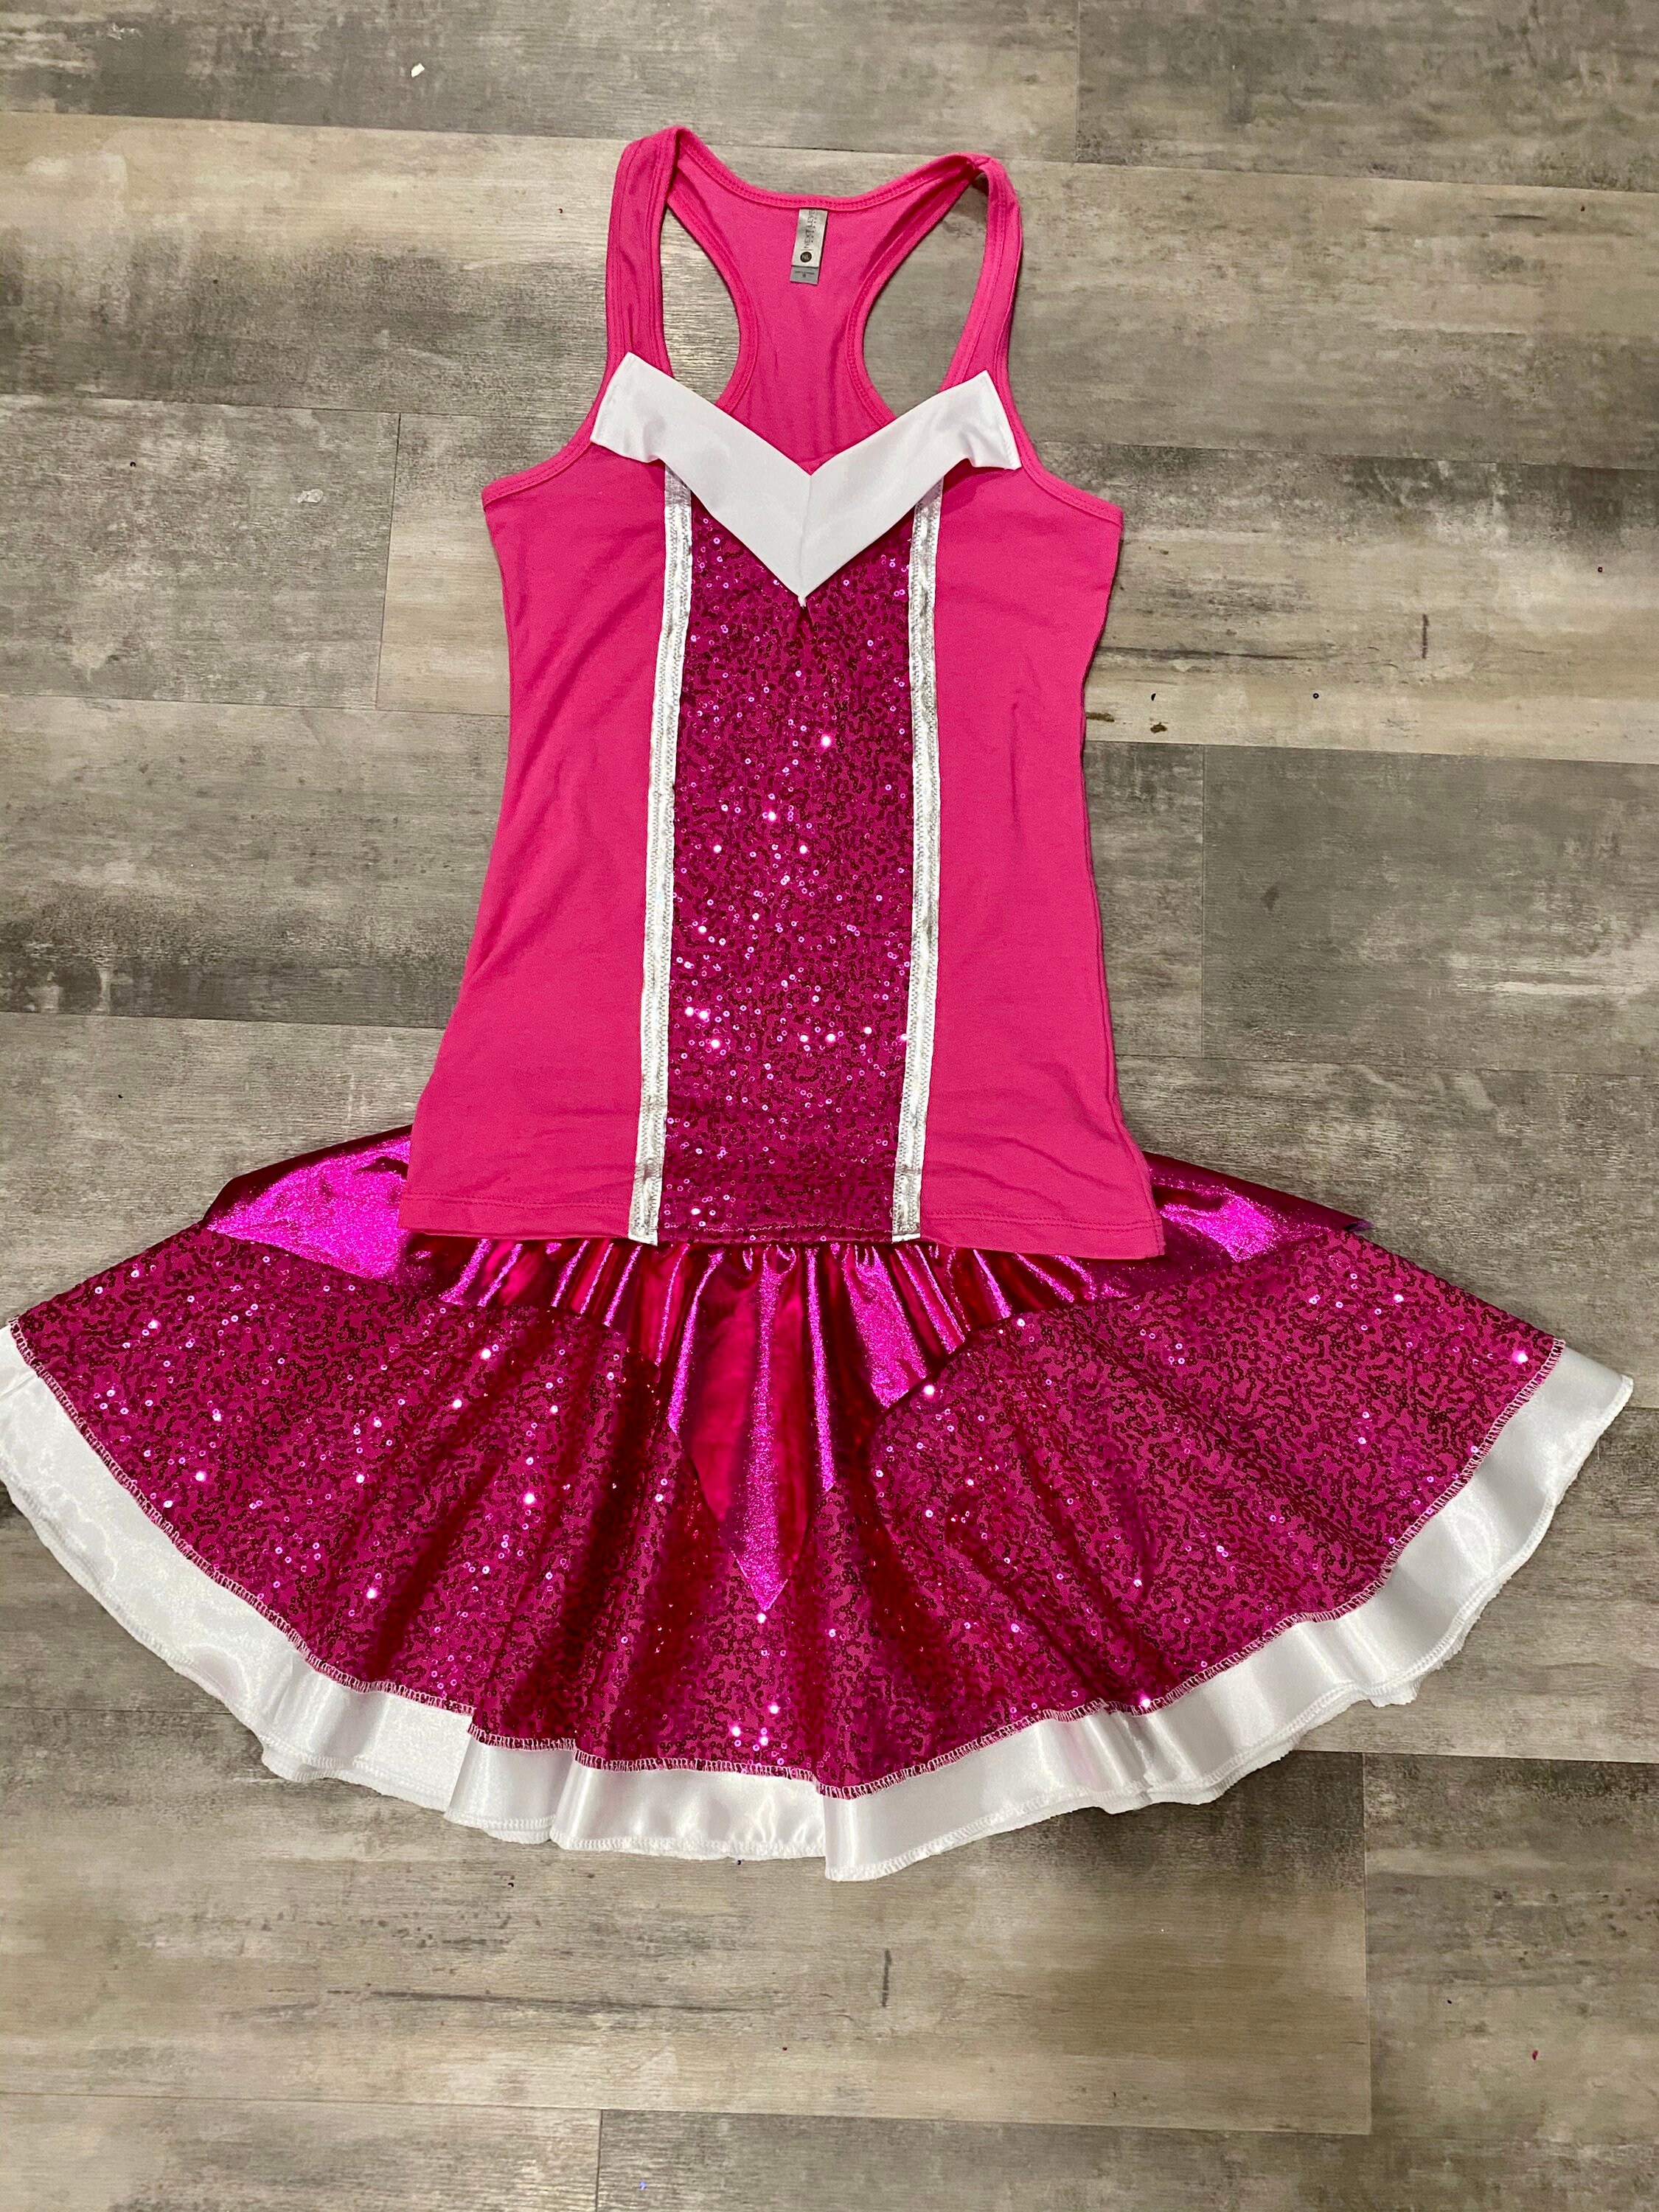 Bling Beauty Sleeping Pink Inspired Running Complete Outfit / | Etsy